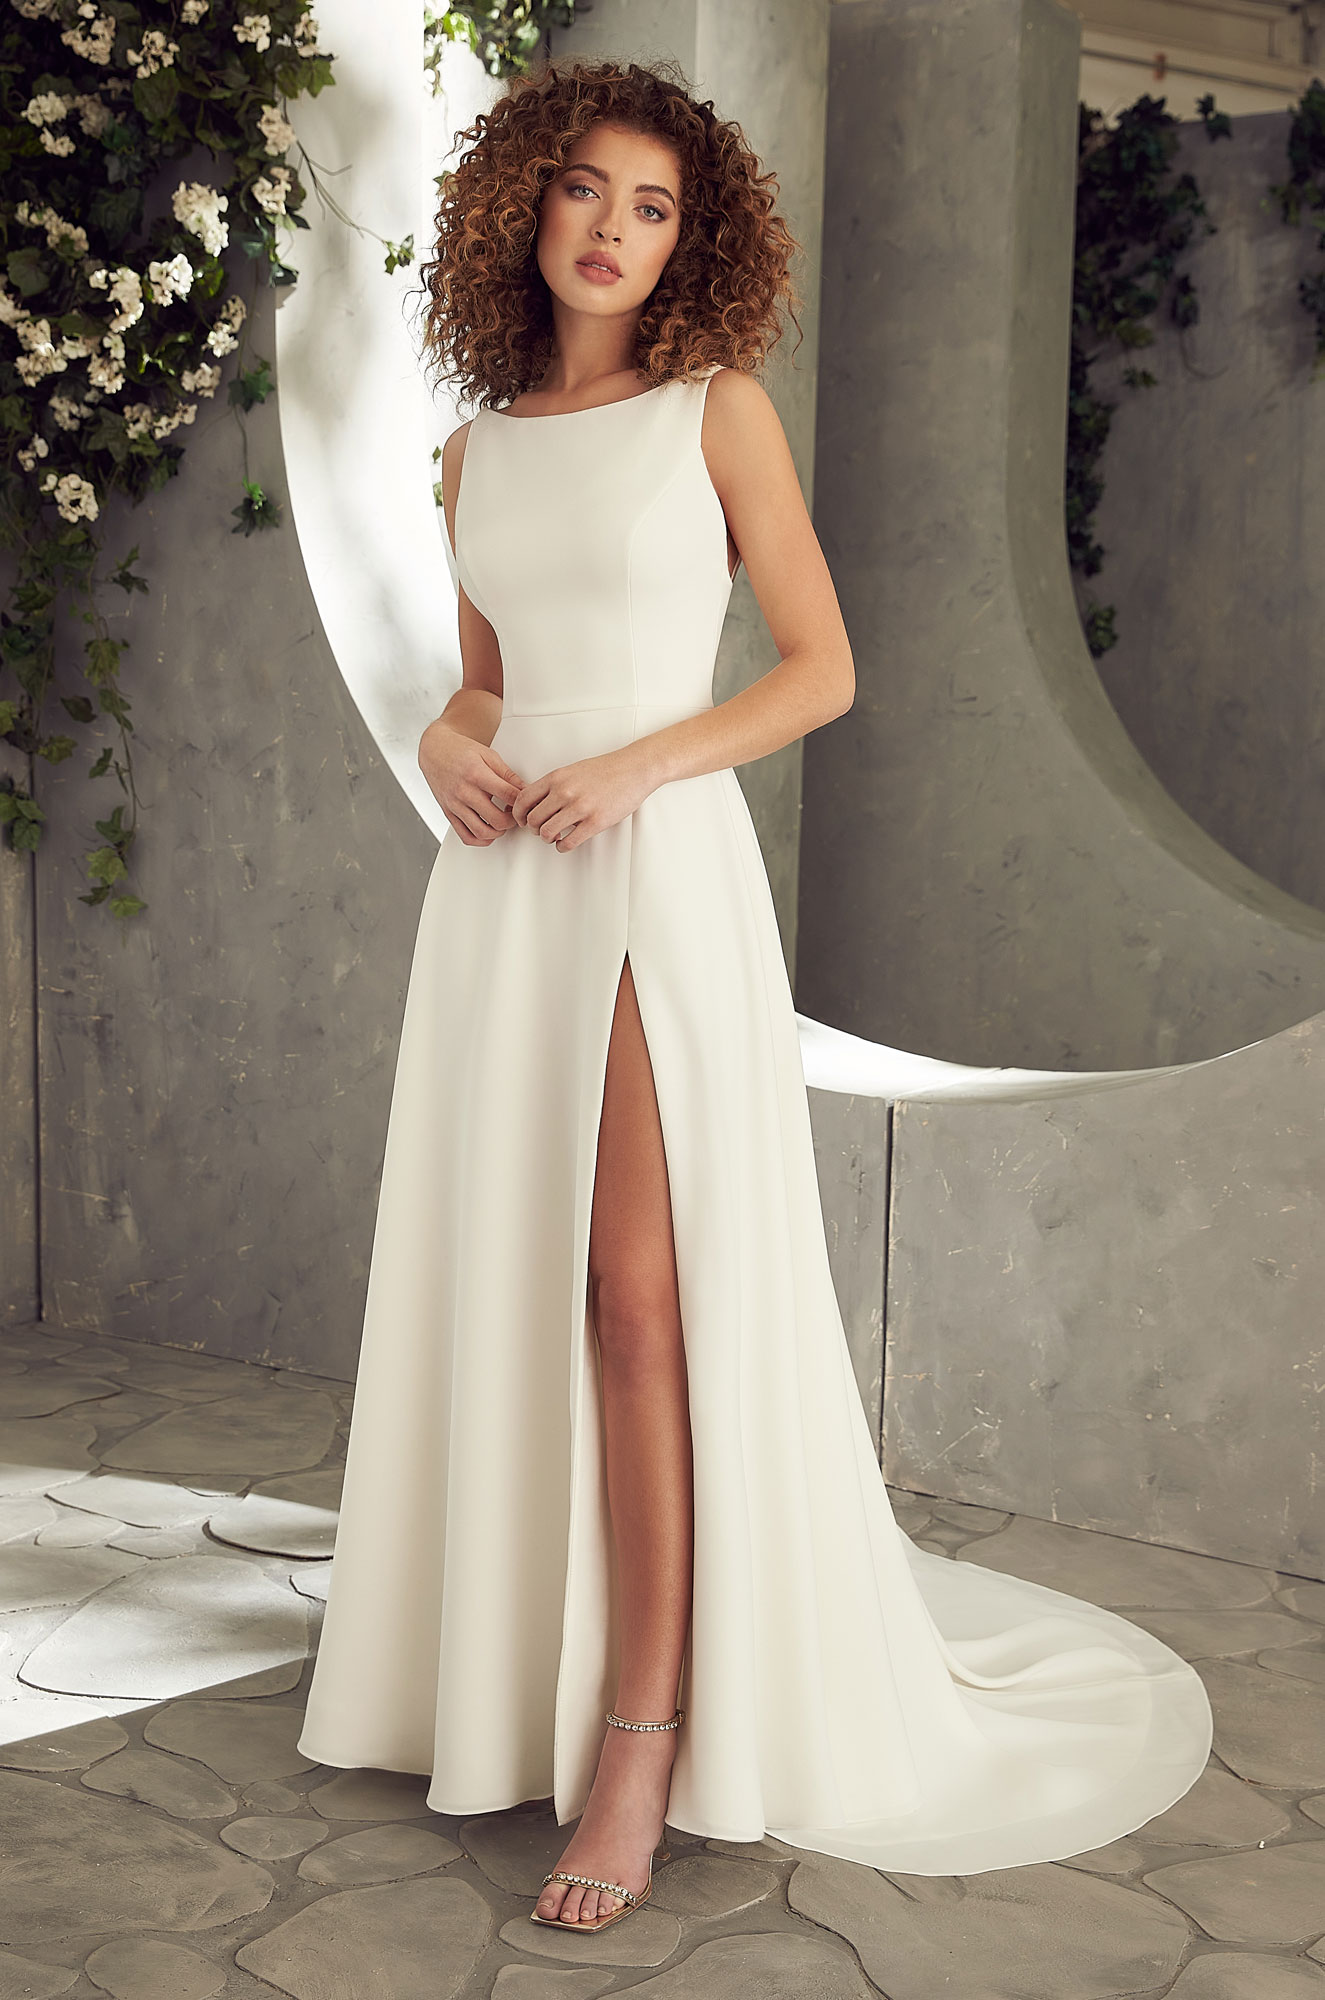 11 sophisticated, minimalist wedding dresses from Mikaella - Today's Bride